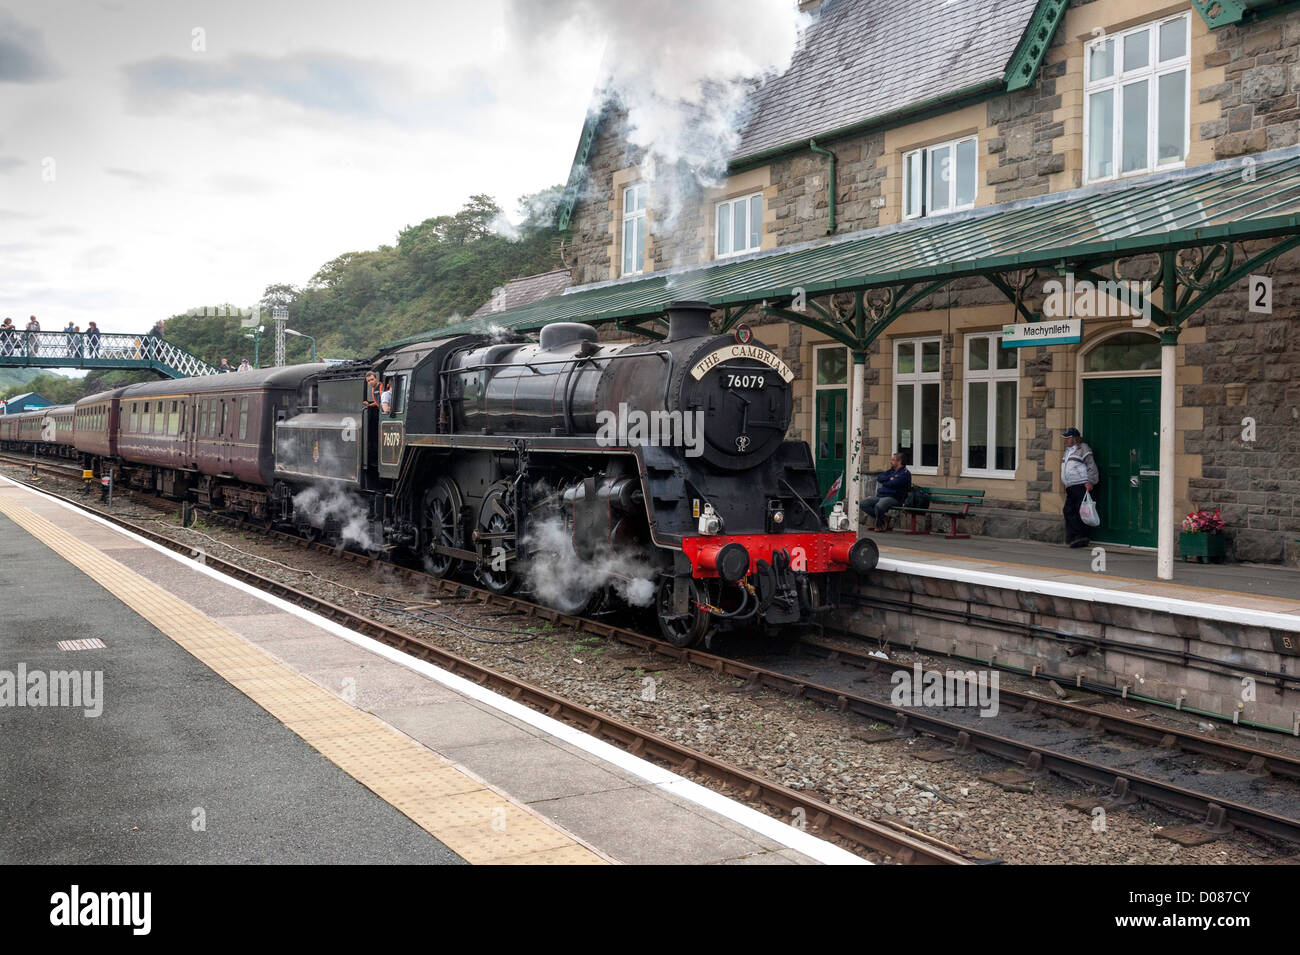 The Cambrian steam train approaches Machynlleth railway station platform pulling some passenger coaches for coastal rail trip Stock Photo